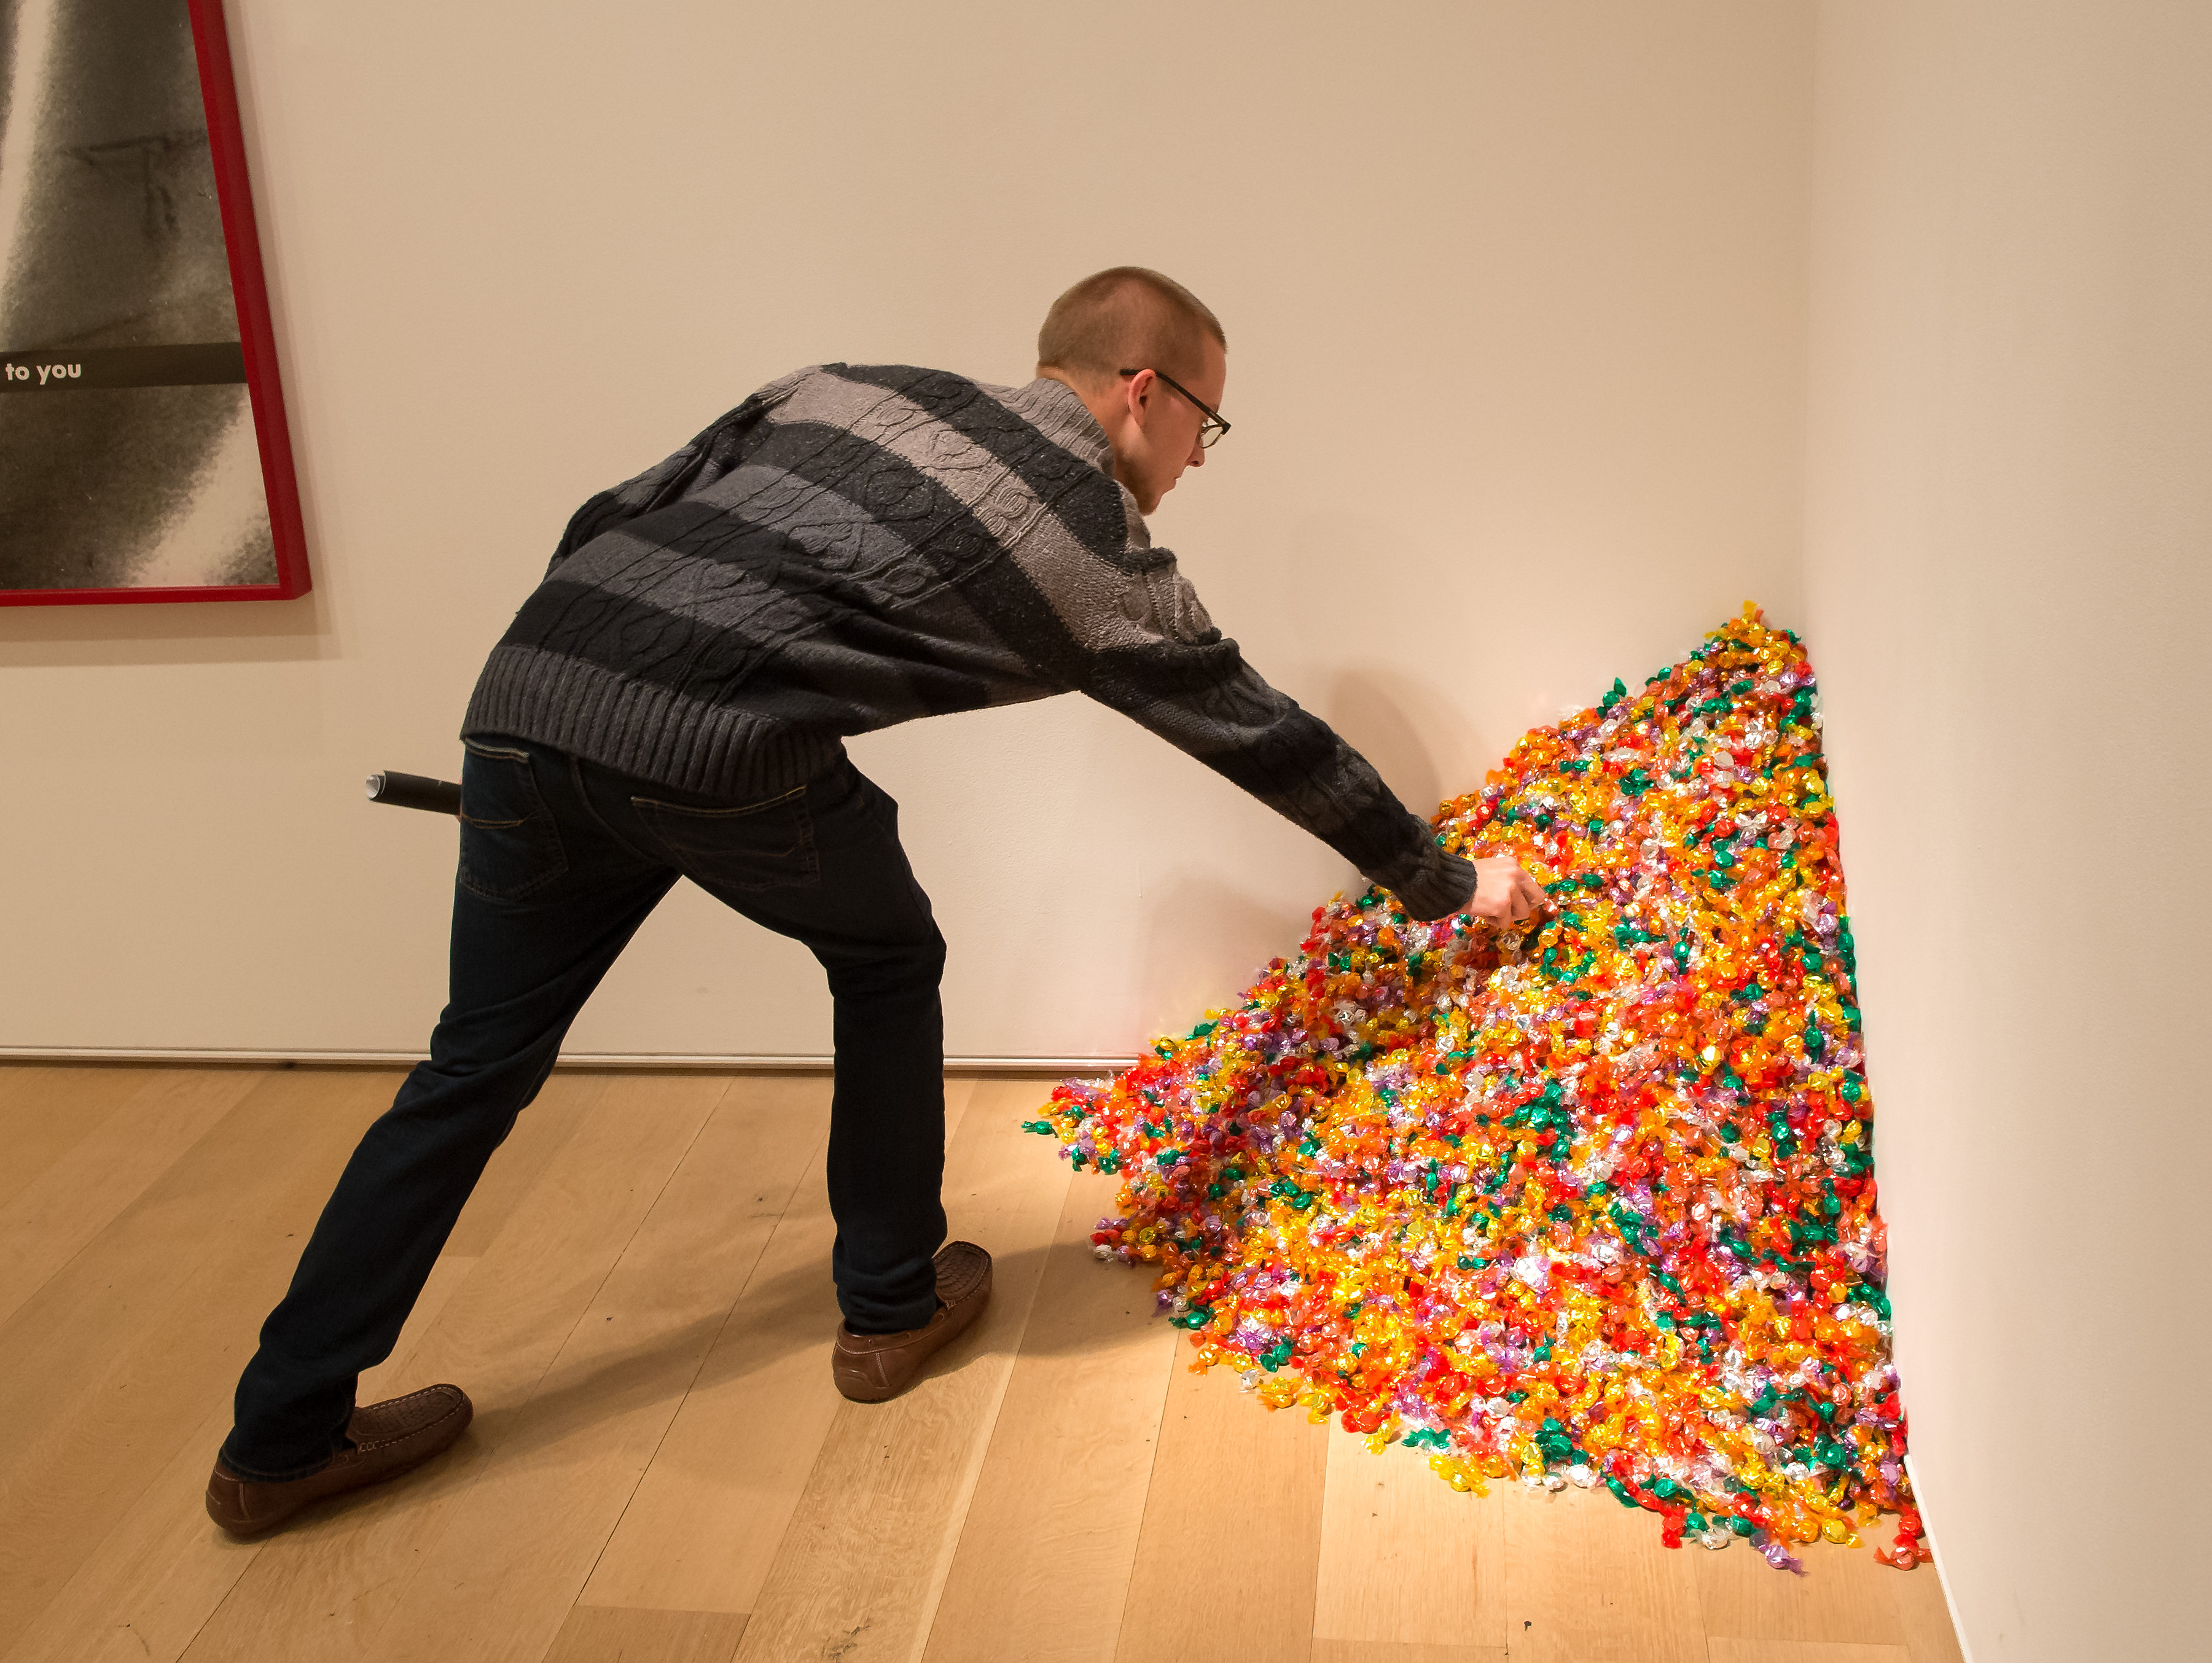 A masculine person with short hair, glasses, and a striped sweater reaching down to grab a piece of candy from a large pile of colorful wrapped candies sitting in the corner of a room. The man has his back turned to the camera